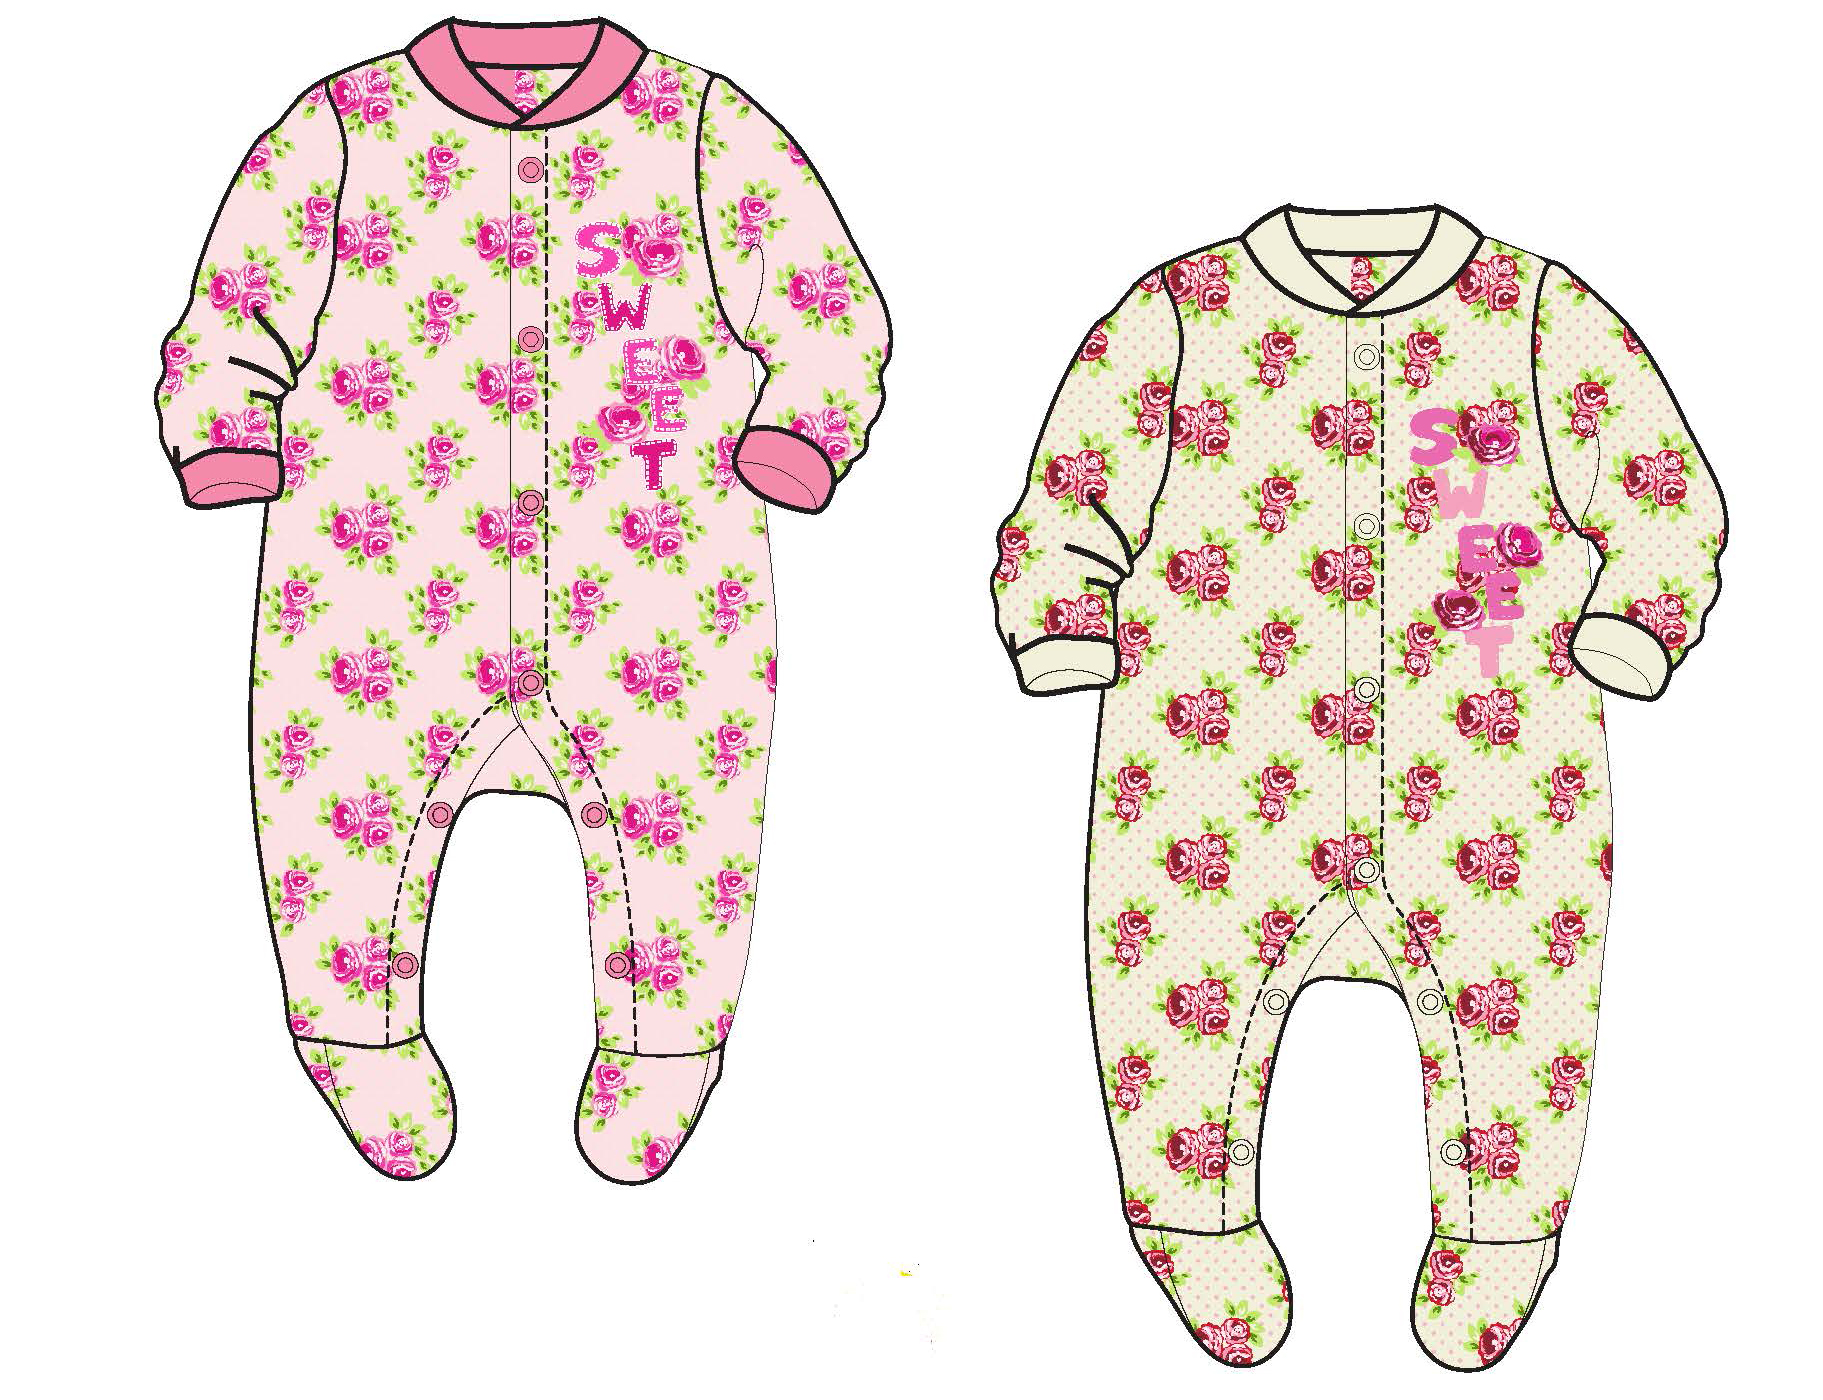 Baby Girl's Knit One-Piece Footed PAJAMAS w/ Embroidered Sweet & Rose Floral Print - Sizes 0/3M-9M